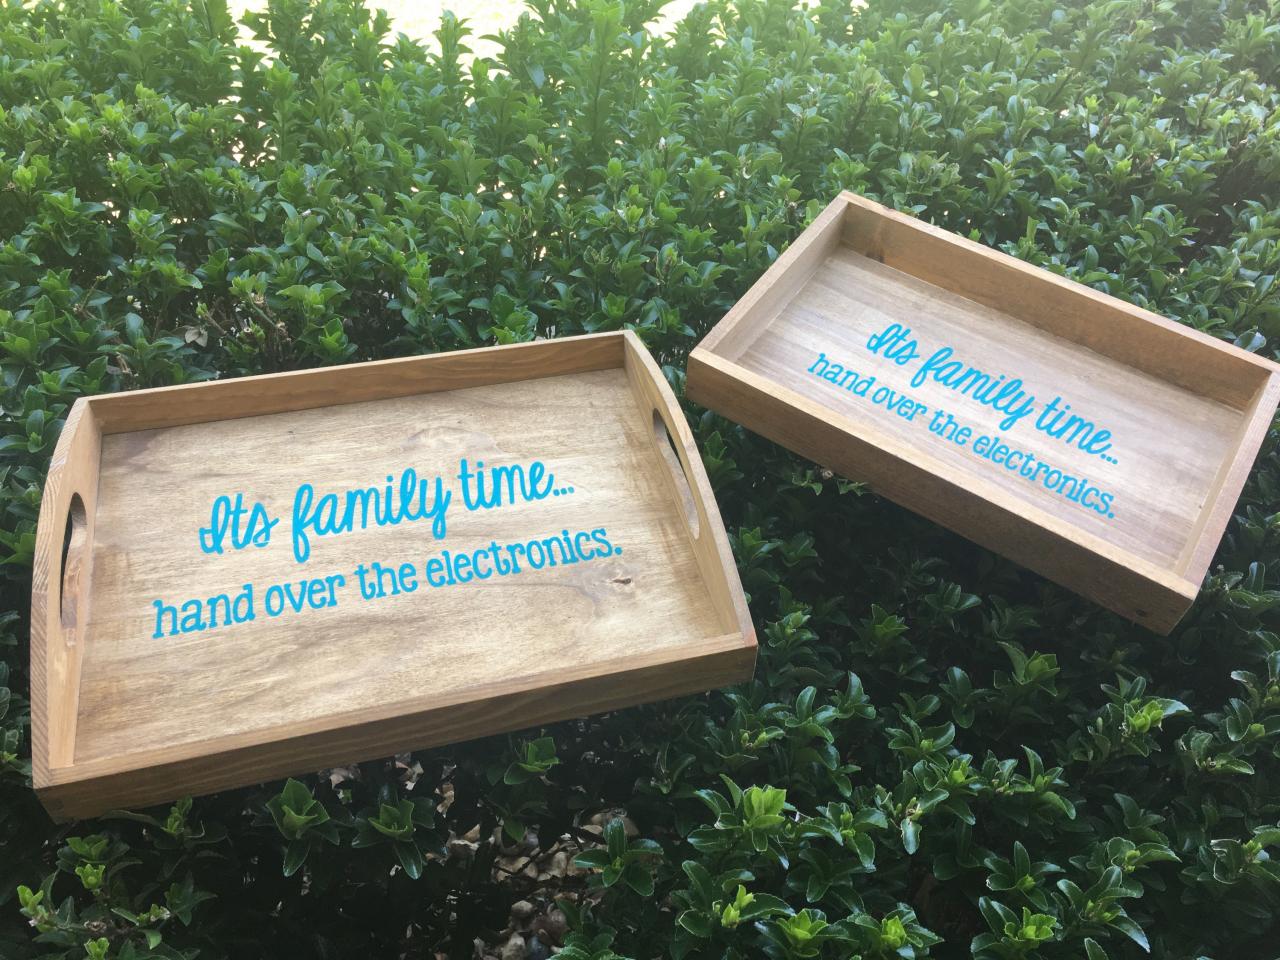 Family time electronics hand painted wood box. Its family time hand over the electronics. 2 sizes/ options. Lake time.